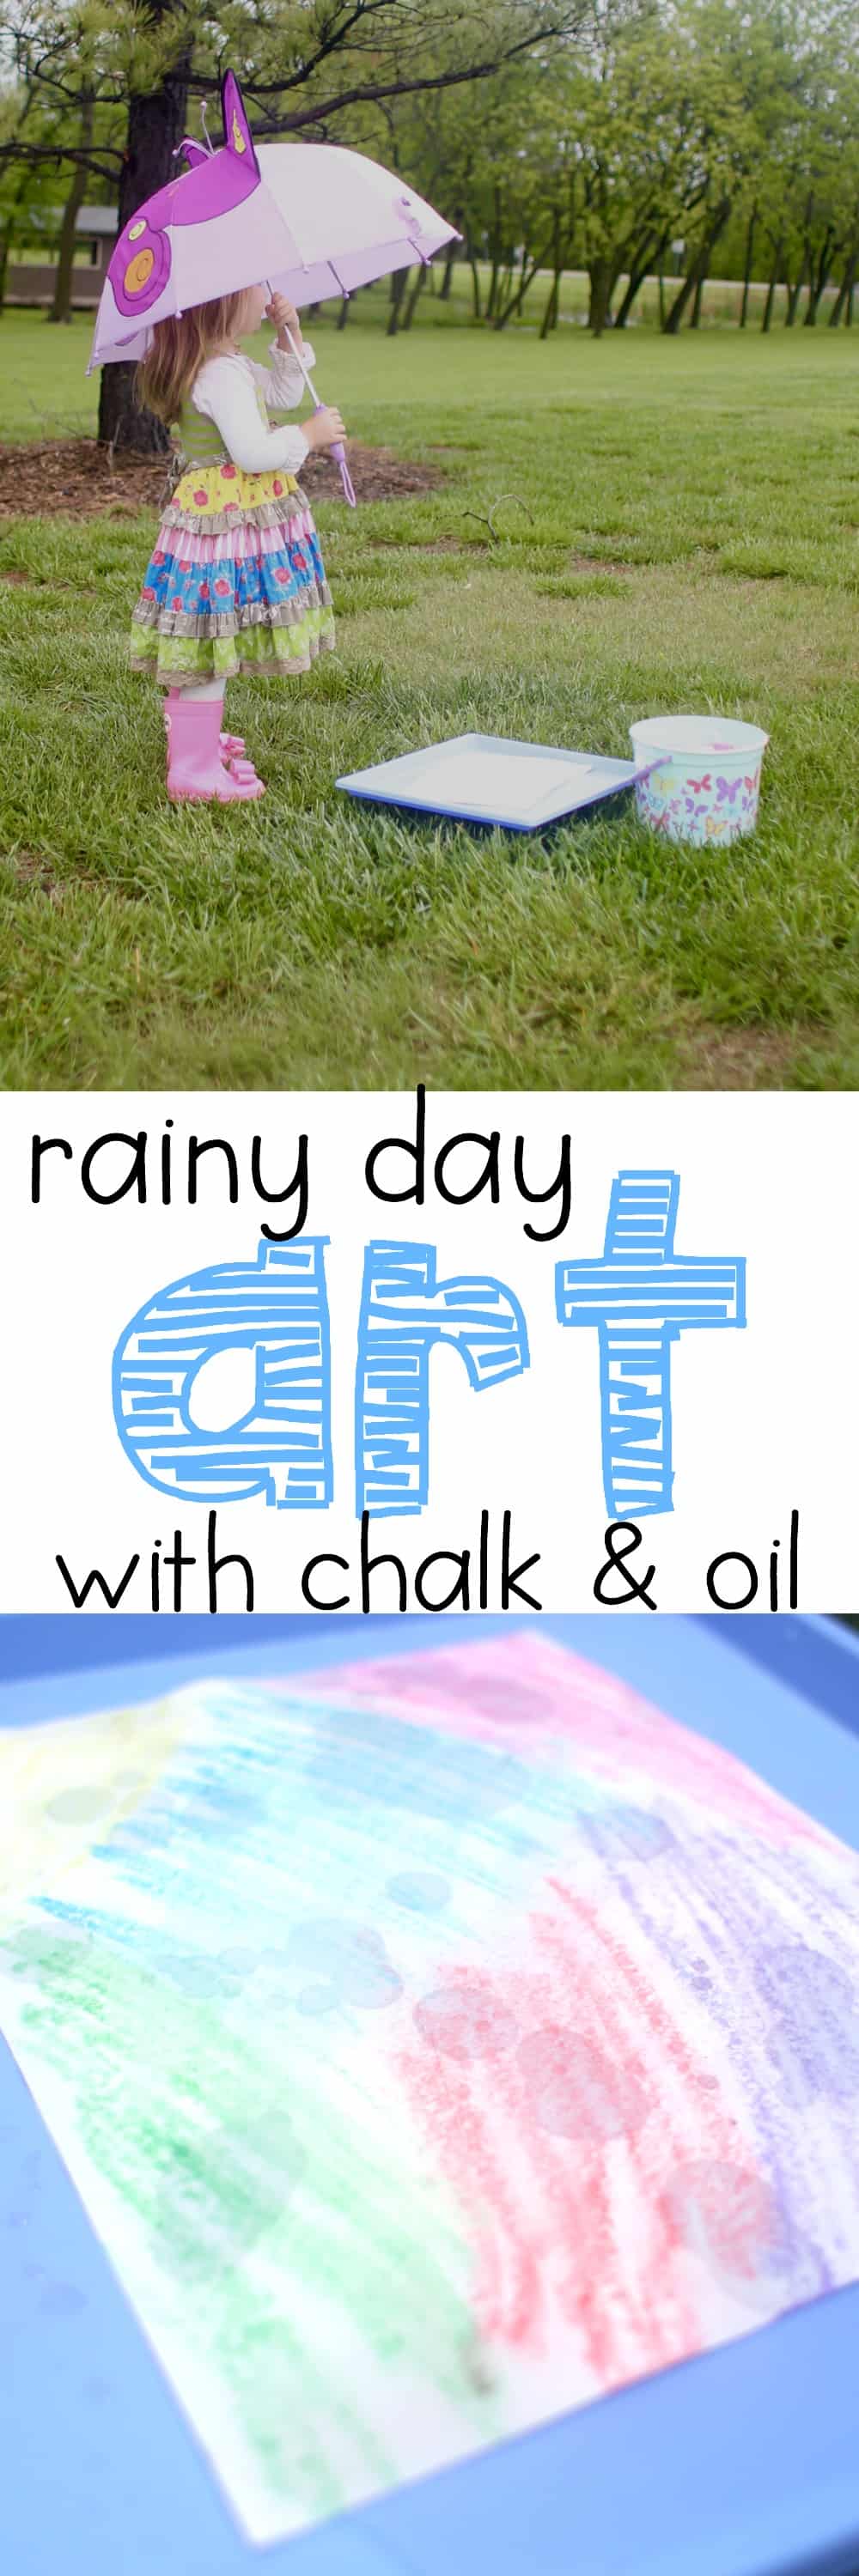 Rainy Day Art with Chalk and Oil